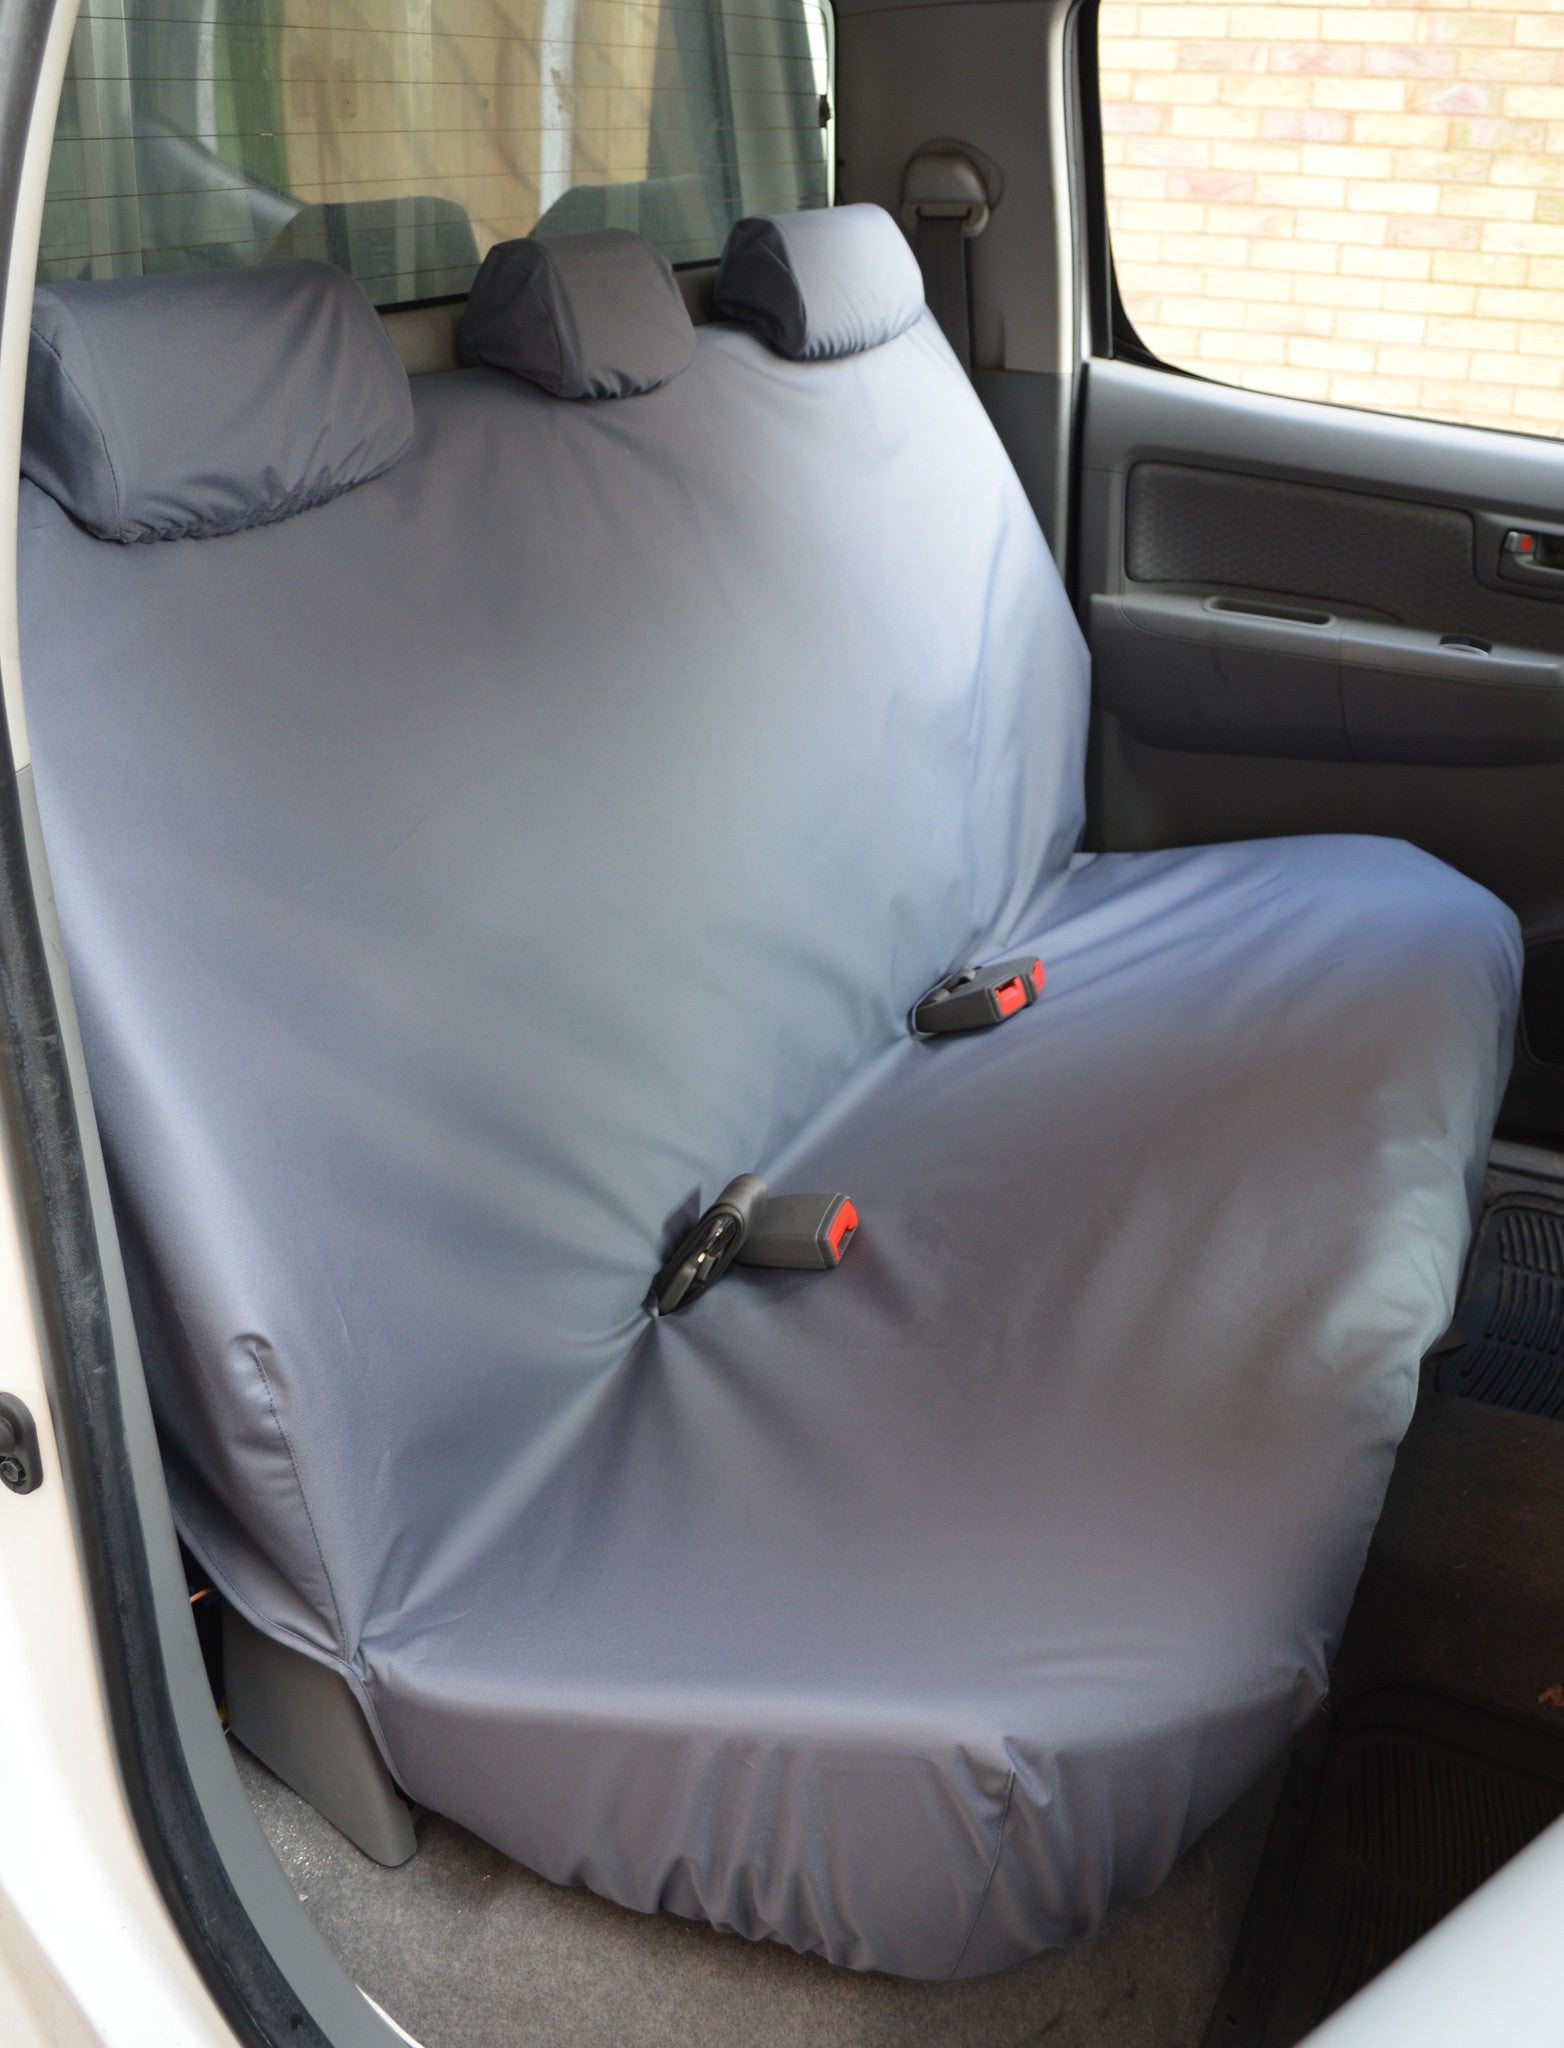 Toyota Hilux Invincible 2005 - 2016 Seat Covers Rear Seat Cover / Grey Turtle Covers Ltd